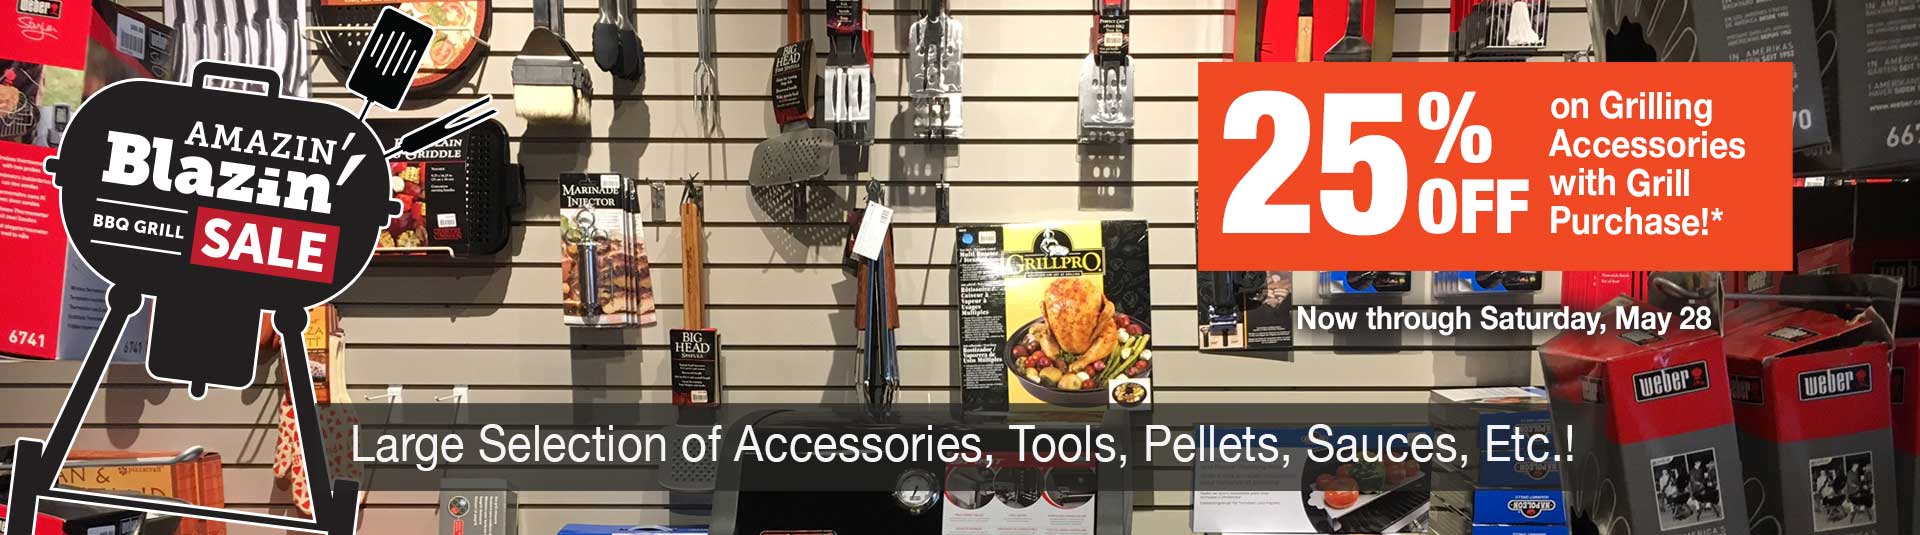 All Grill Accessories 25% Off during the Amazin' Glazin' BBQ Grill Sale at Benson Stone Company! BBQ tools, pellets, sauces, etc.